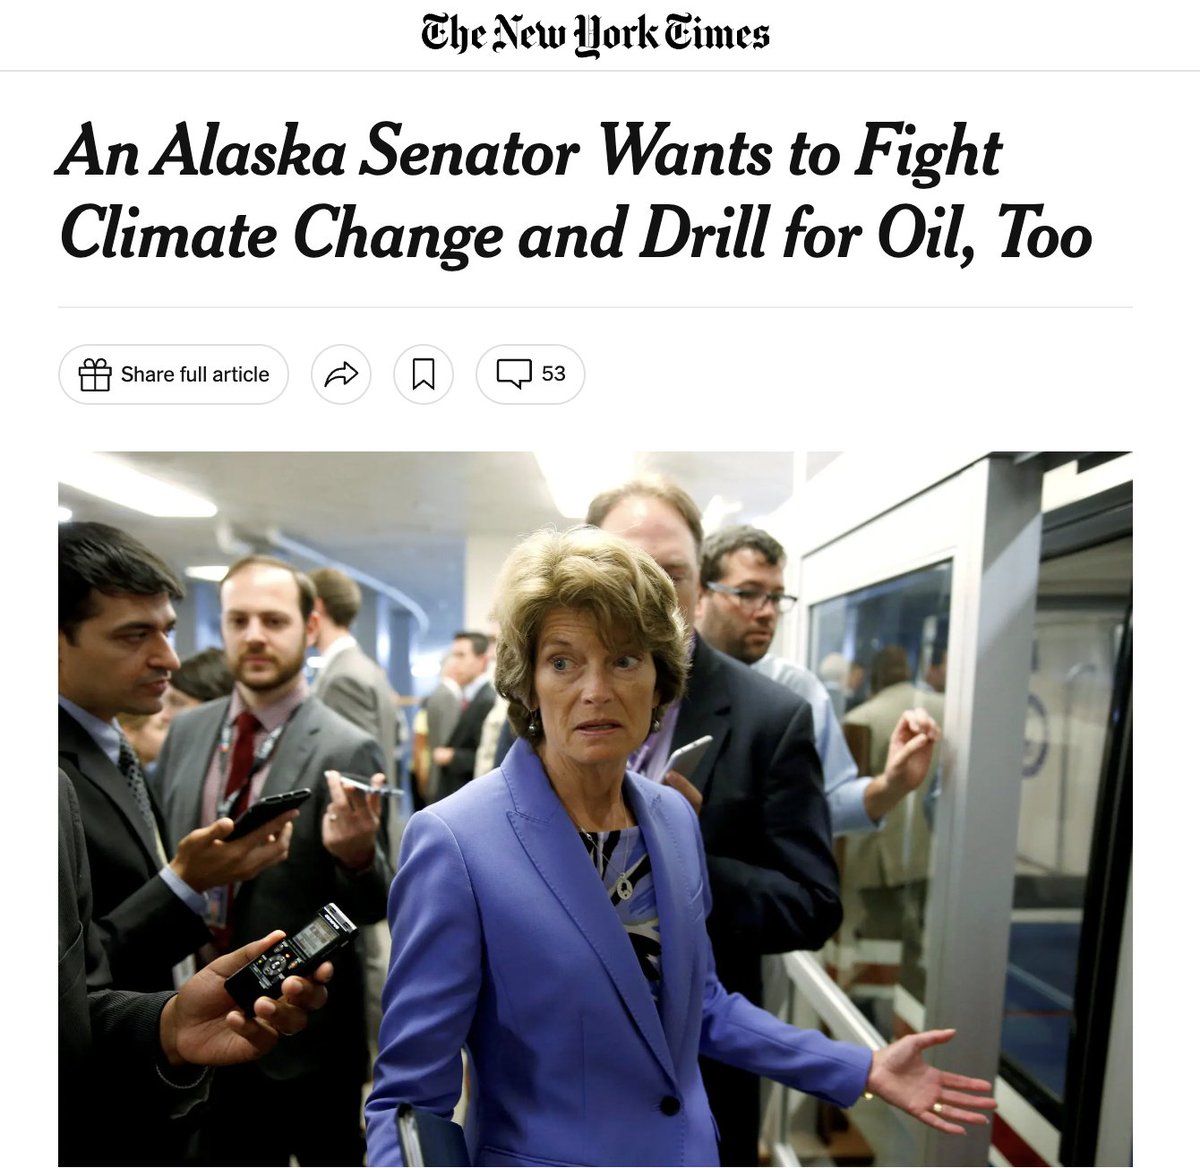 Murkowski brands herself as a moderate but in truth she is an ecocidal pyromaniac. She fought tooth and nail to open up the Arctic National Wildlife Refuge to big oil. Is nothing sacred? Is nothing sacred? (2/5)